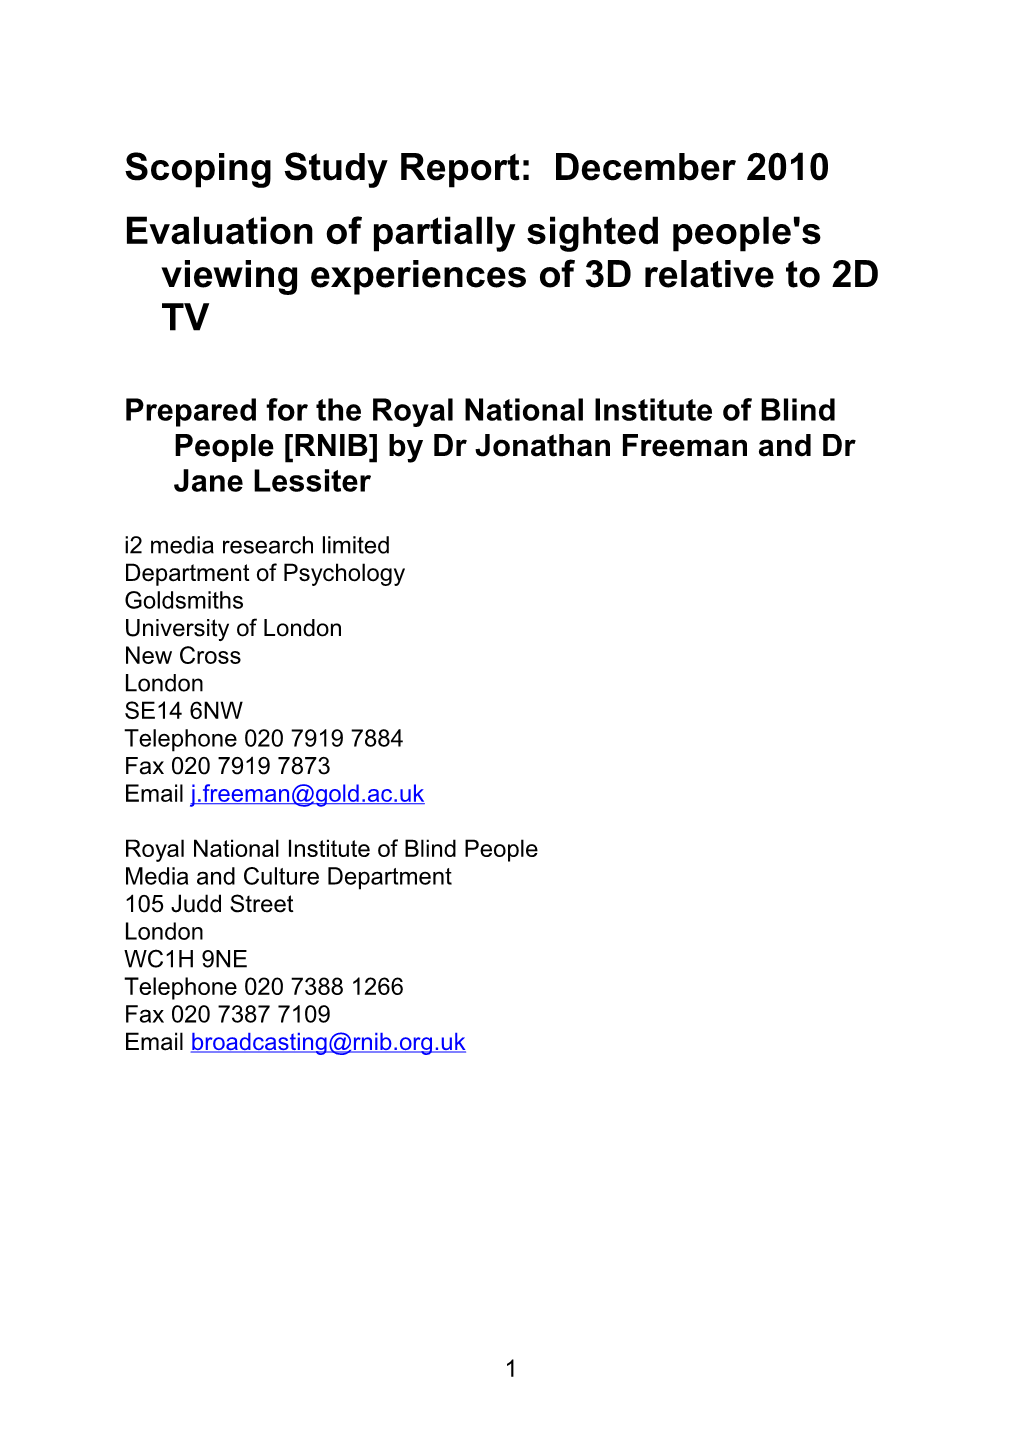 Evaluation of Partially Sighted People's Viewing Experiences of 3D Relative to 2D TV